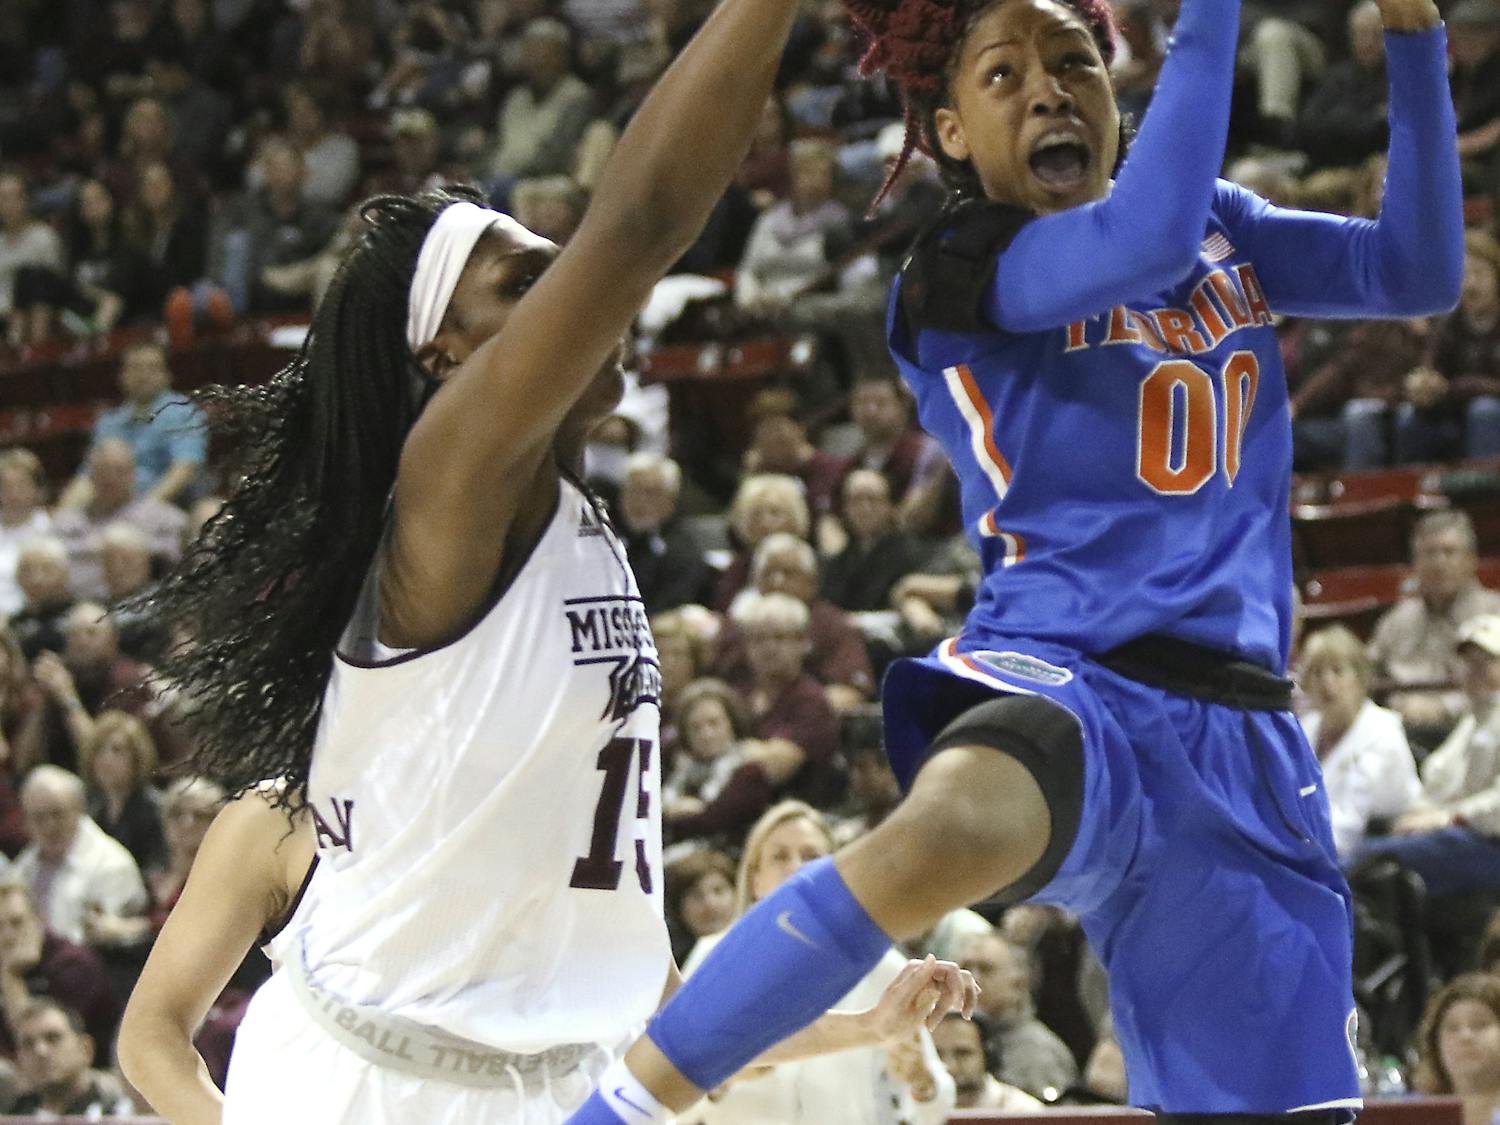 Florida guard Delicia Washington (0) drives to the basket around Mississippi State center Teaira McCowan (15) during the second half of an NCAA college basketball game in Starkville, Miss., Thursday, Jan. 12, 2017. (AP Photo/Jim Lytle)